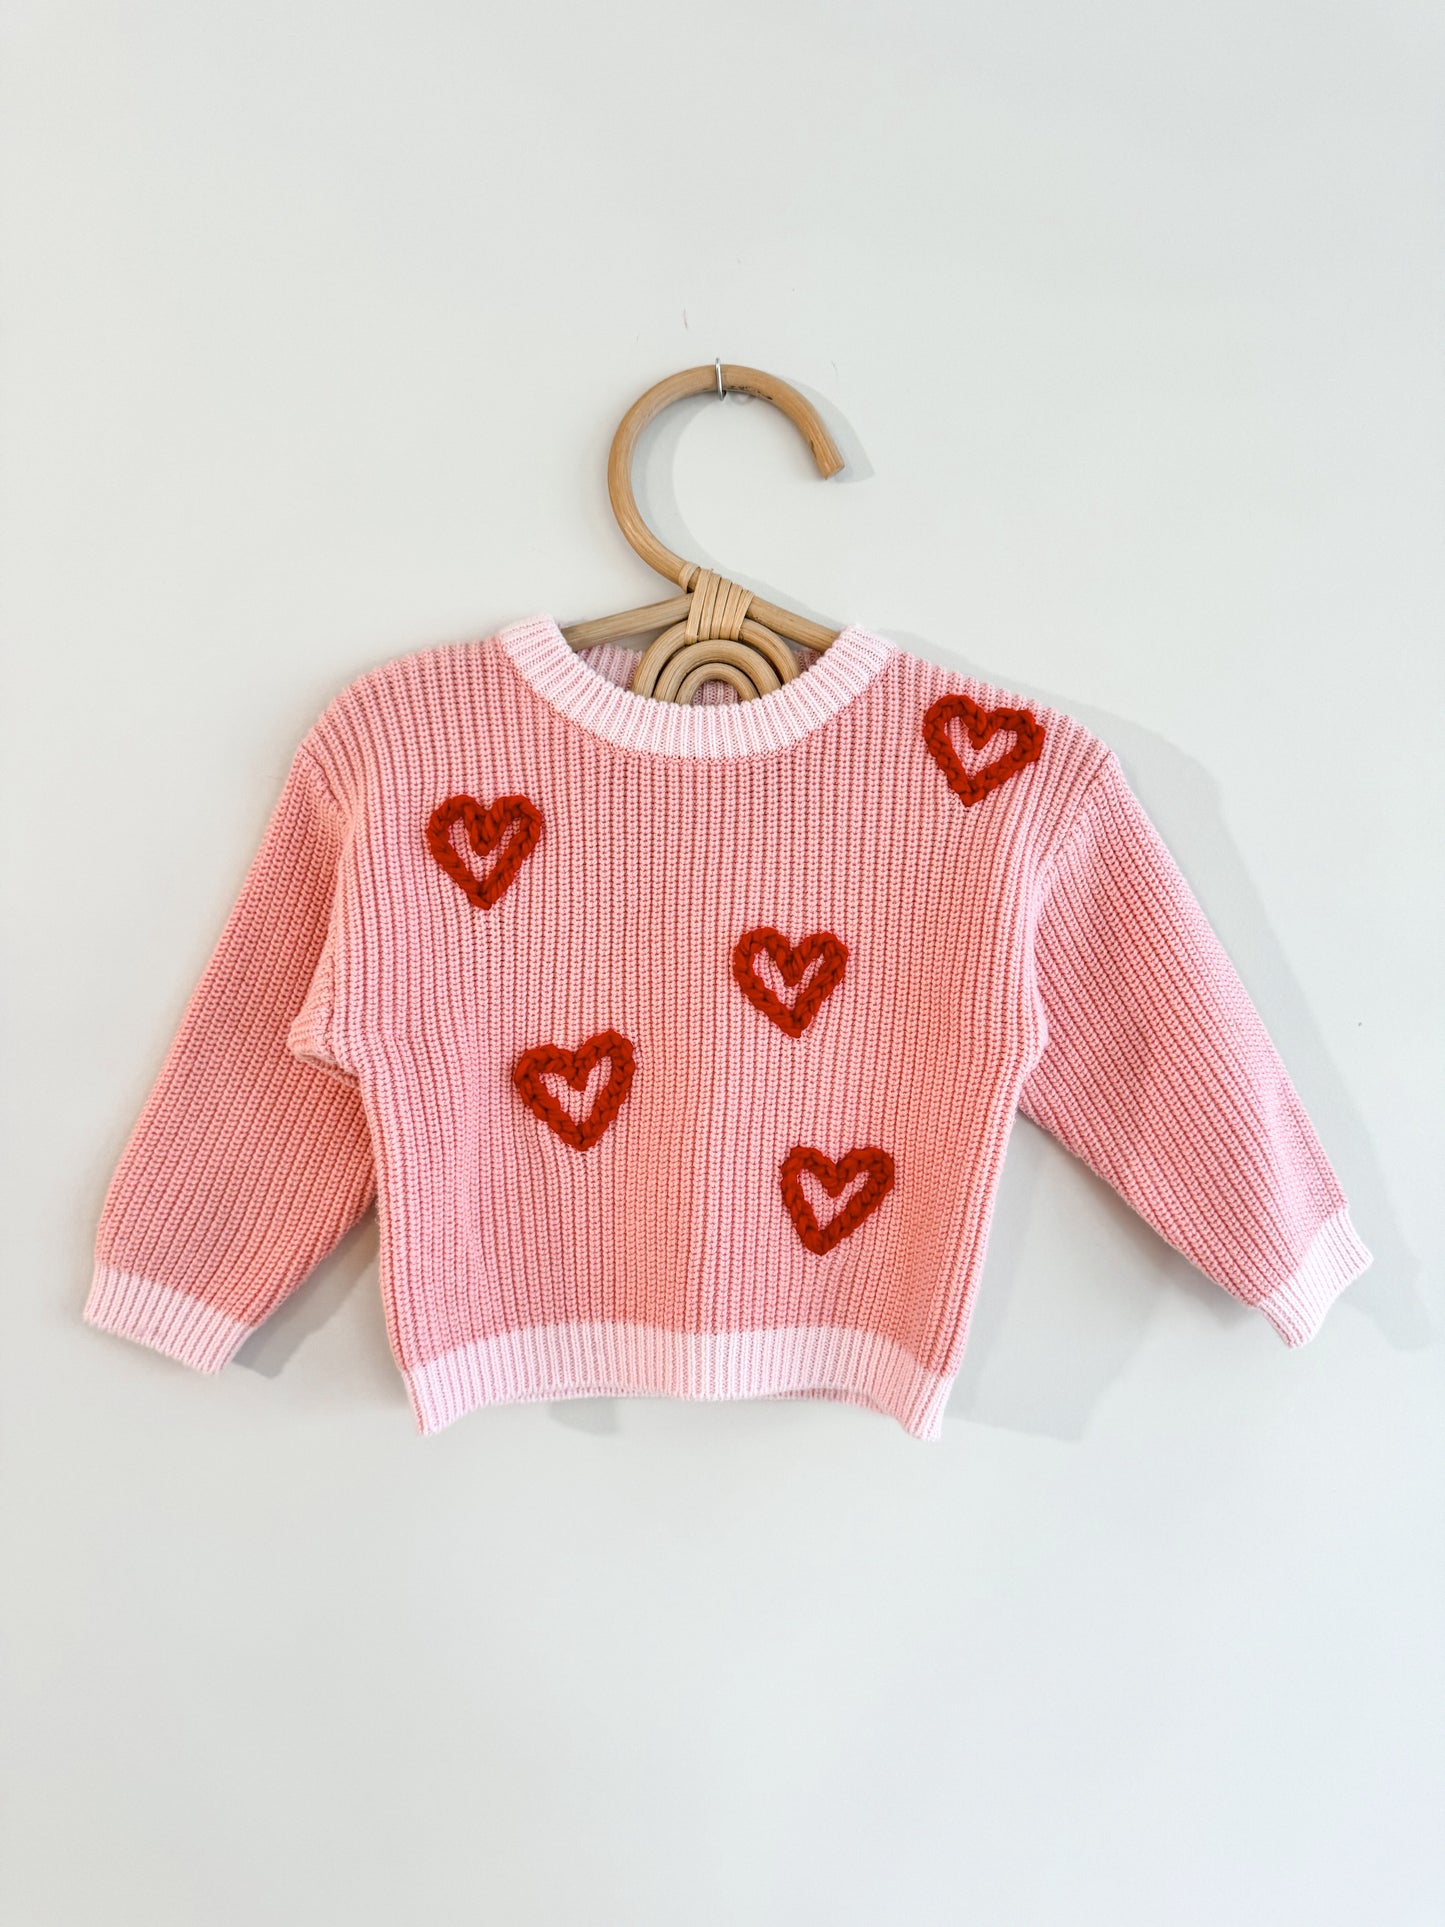 Premade 6 month red heart Sweater